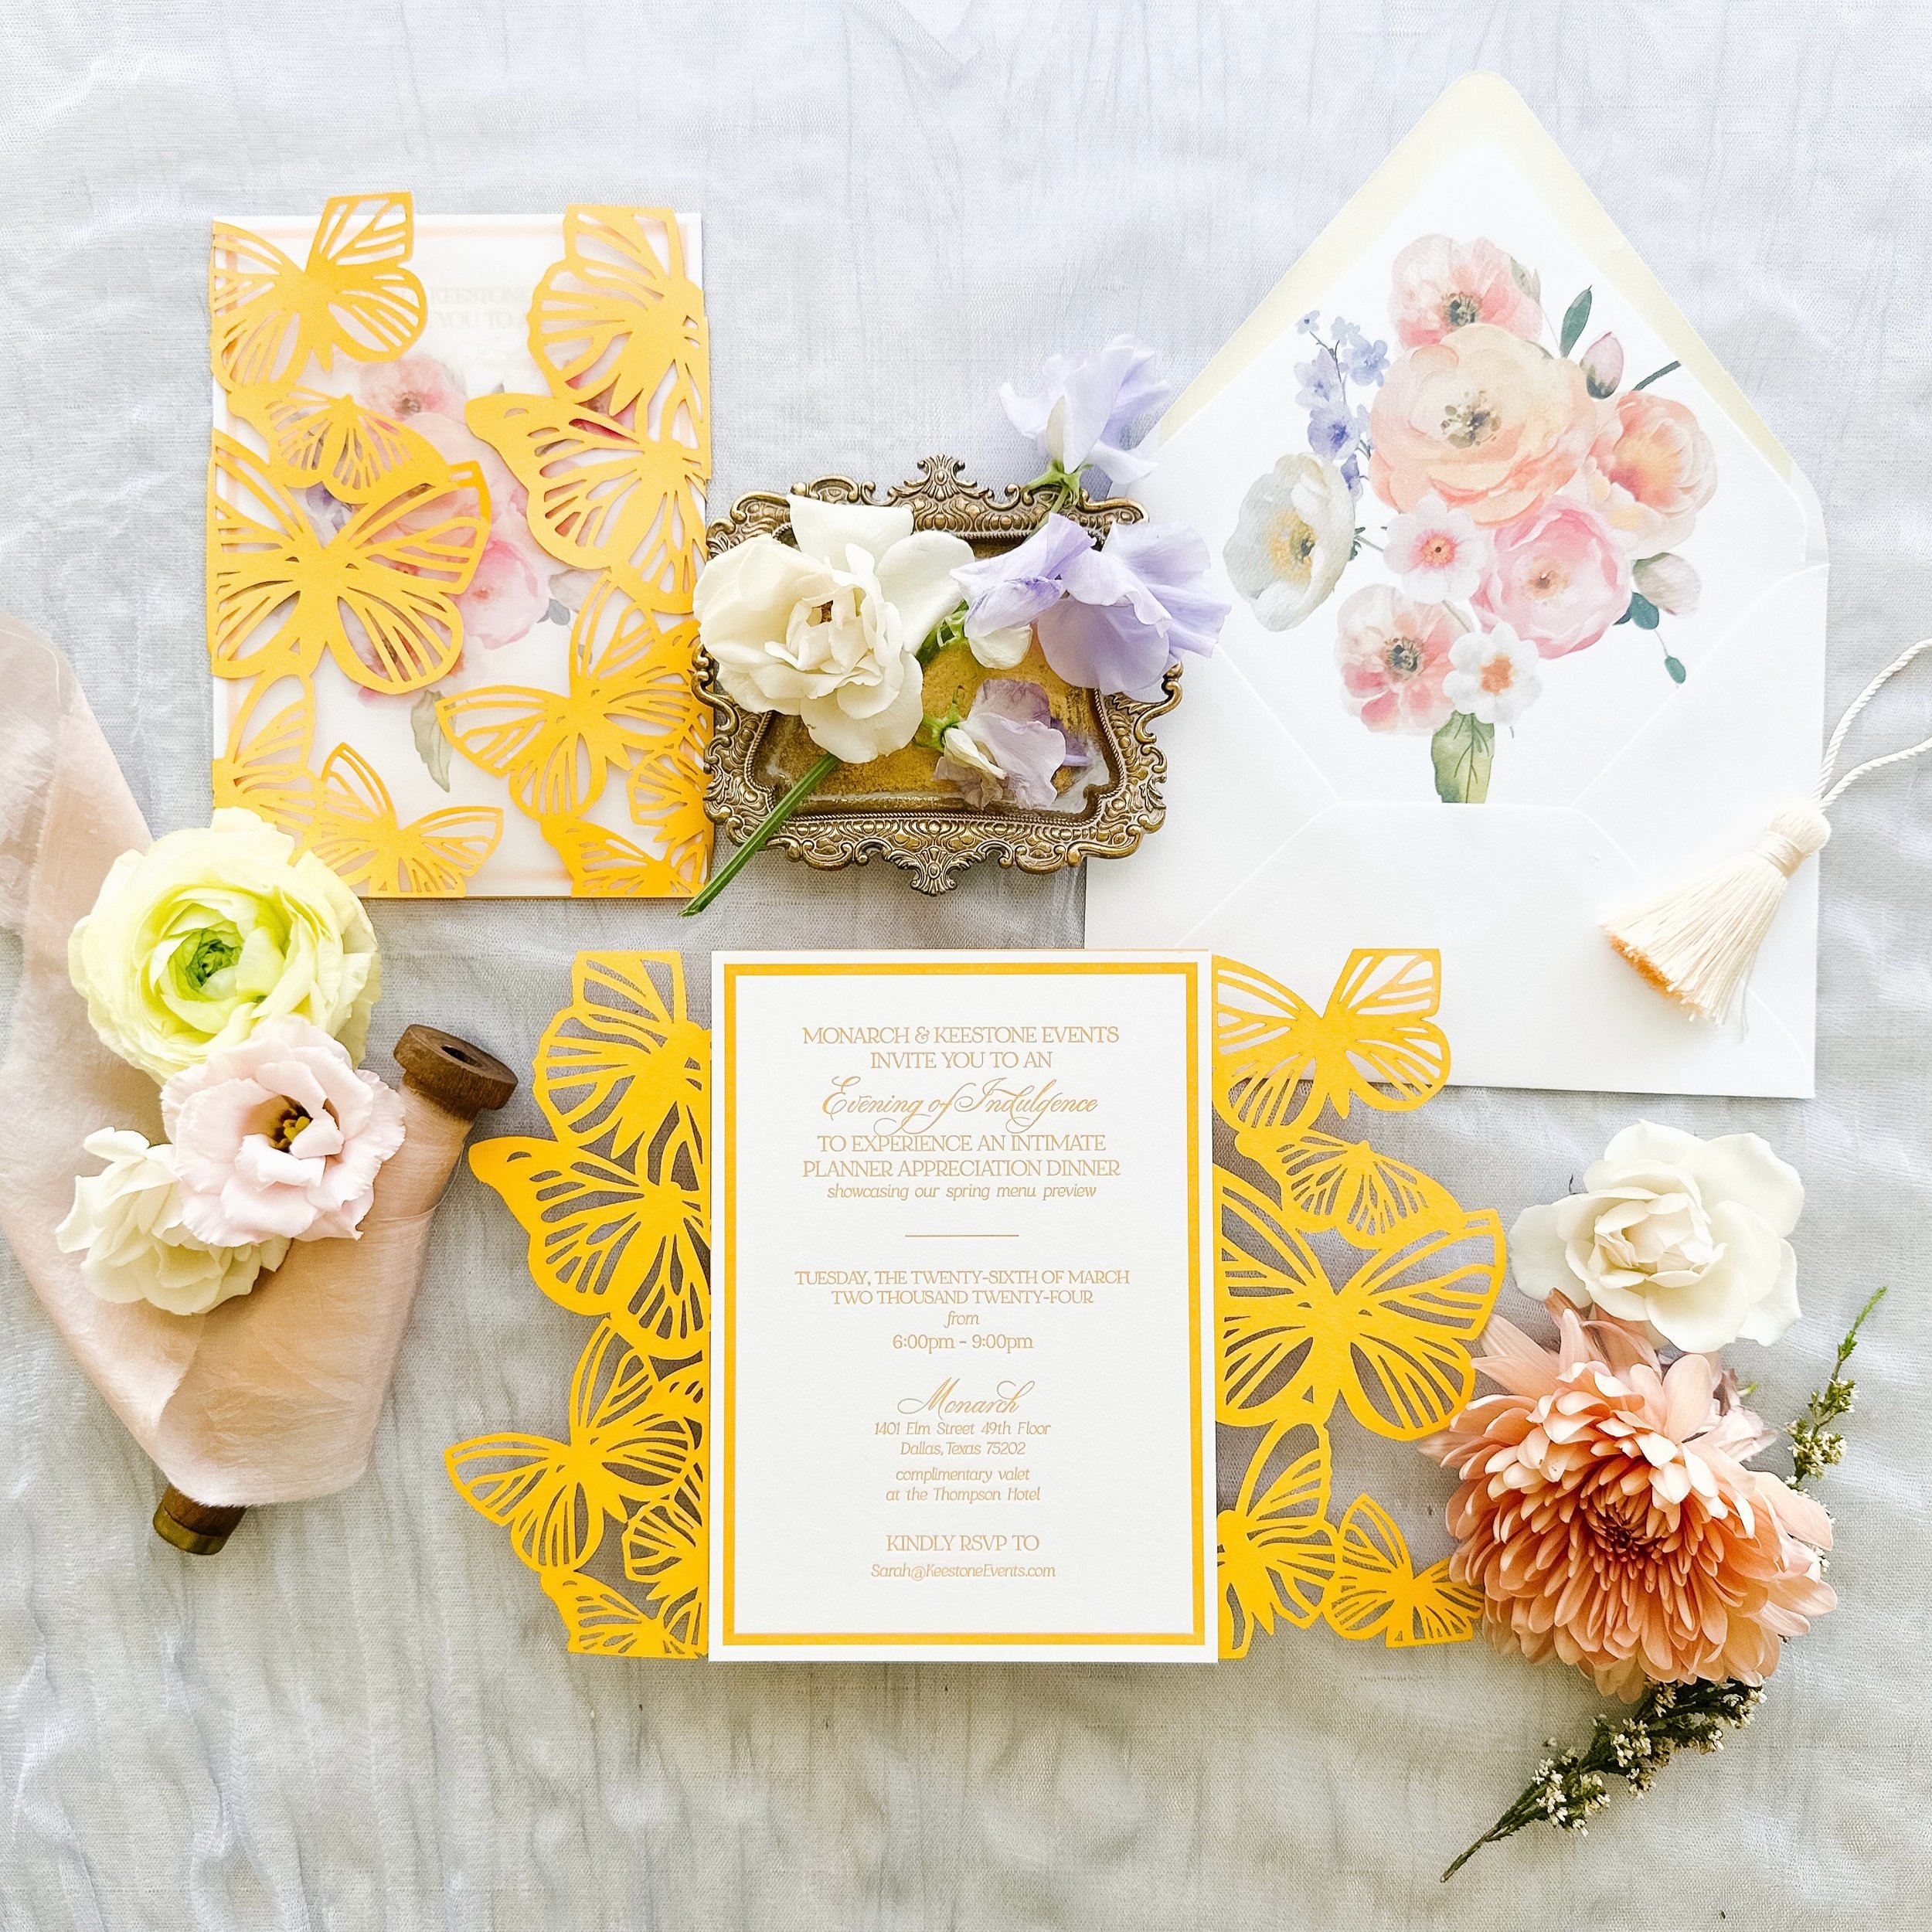 Full spring vibes over here 💐 and still swooning over these invitations for one of the most beautiful nights hosted by @monarchrestaurants &amp; @keestone_events, alongside a team of some of the most talented individuals

&bull;
&bull;
&bull;
&bull;